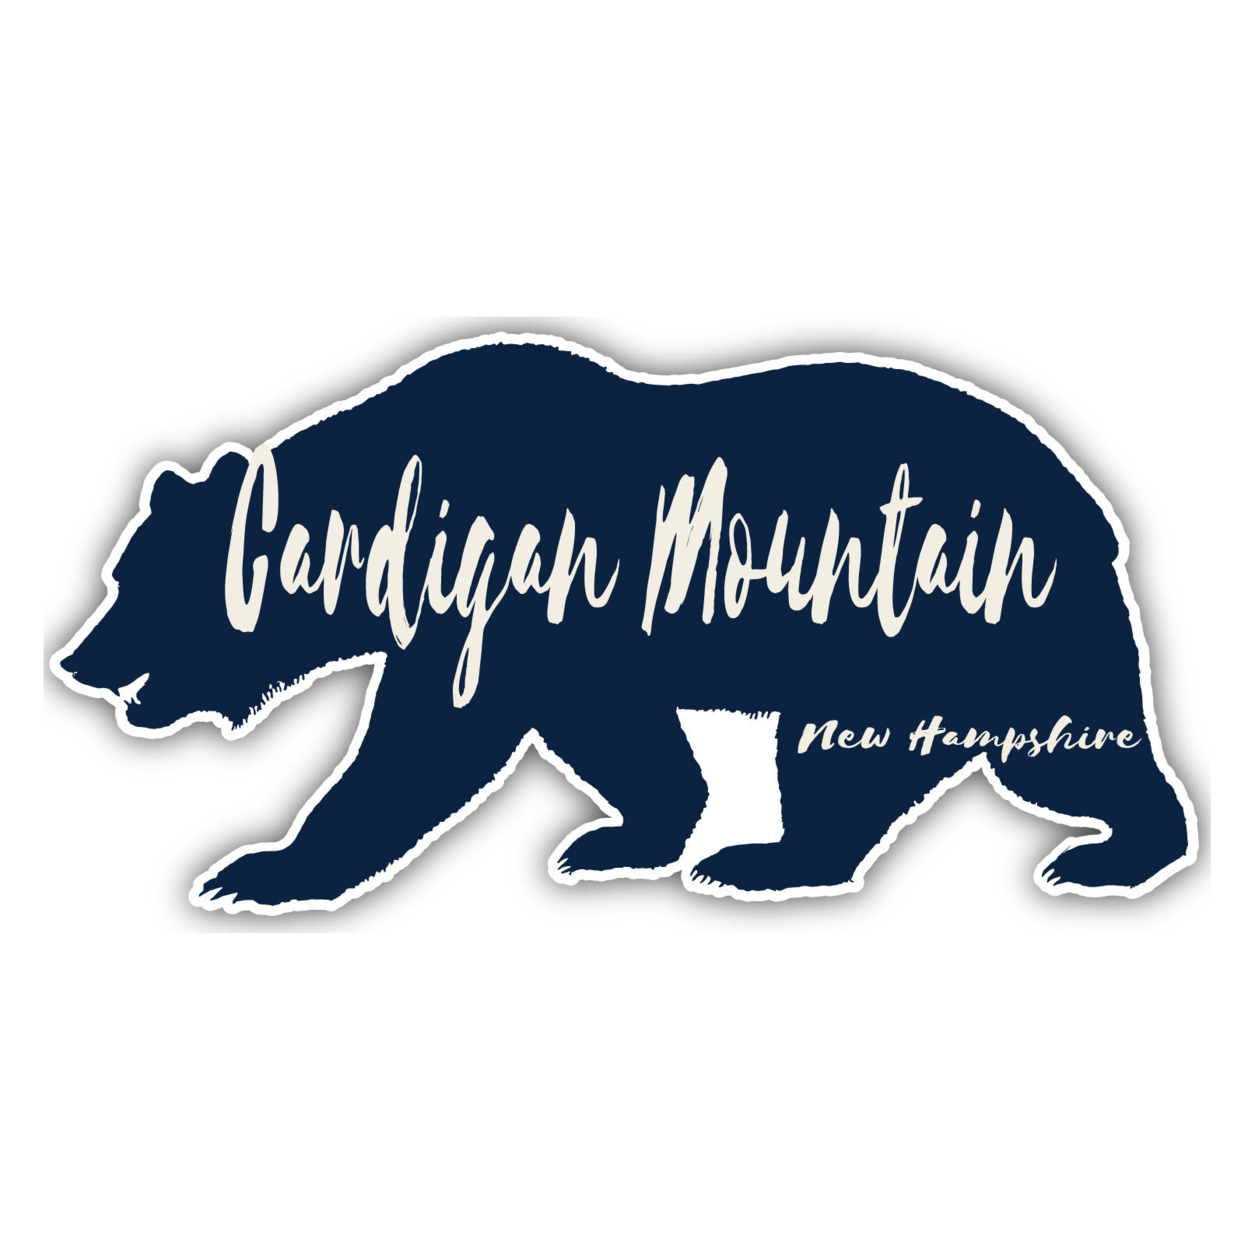 Cardigan Mountain New Hampshire Souvenir Decorative Stickers (Choose Theme And Size) - 4-Pack, 2-Inch, Bear